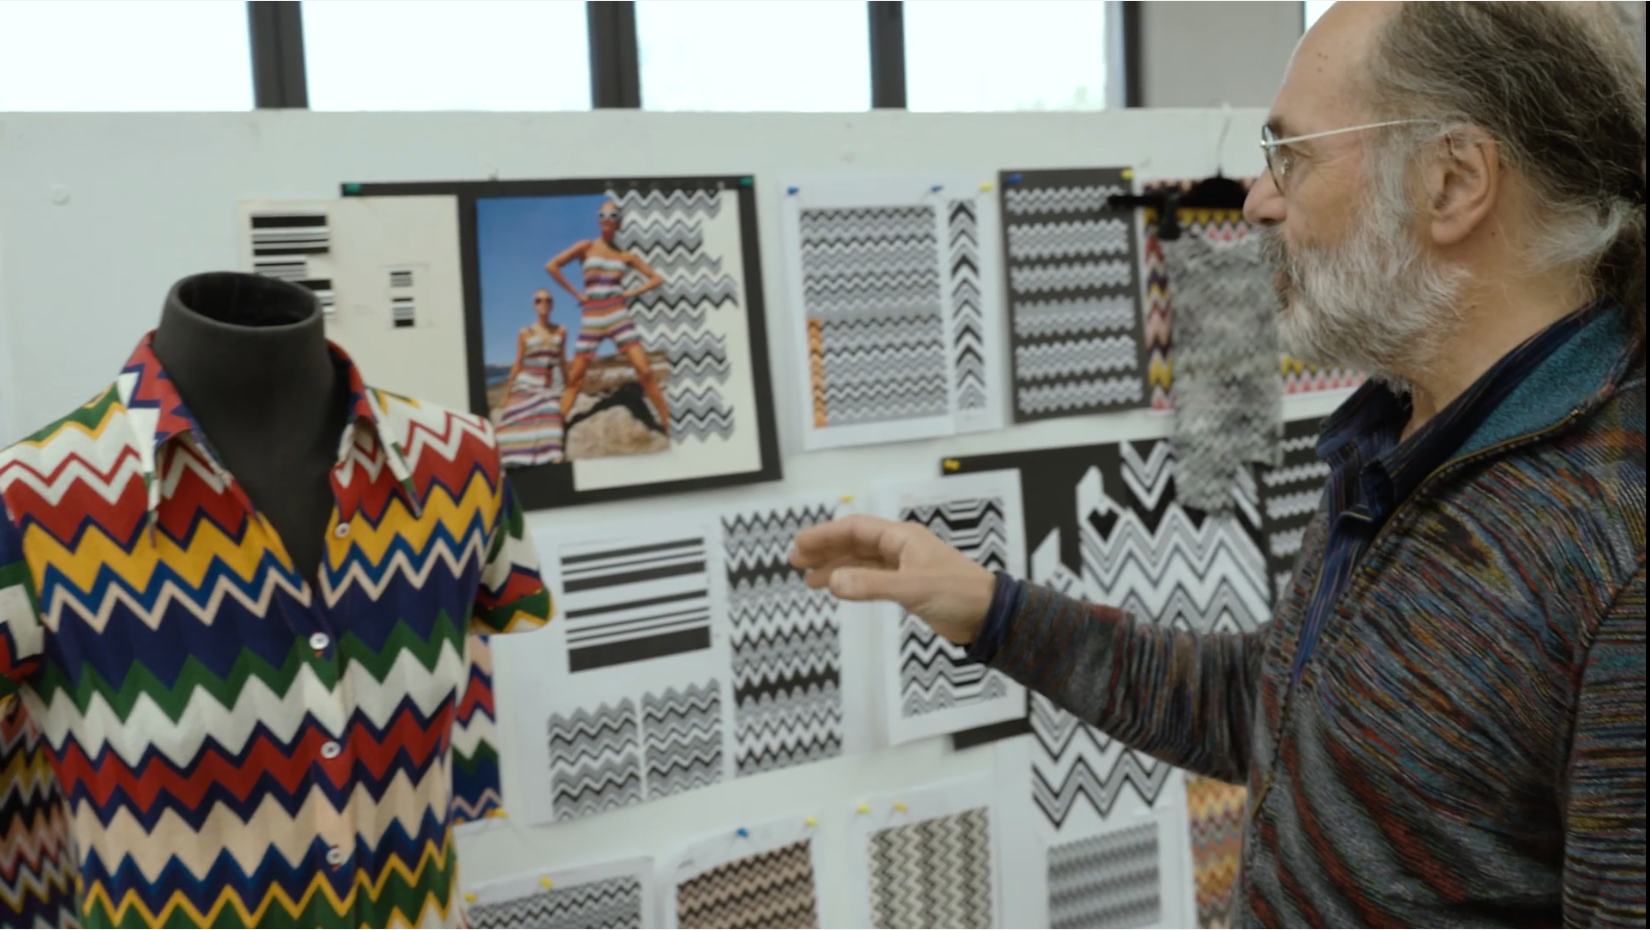 Luca Missoni stands in front of a design board with different patterns. On the left stands a mannequin dressed in a colourful patterned shirt from the Missoni line